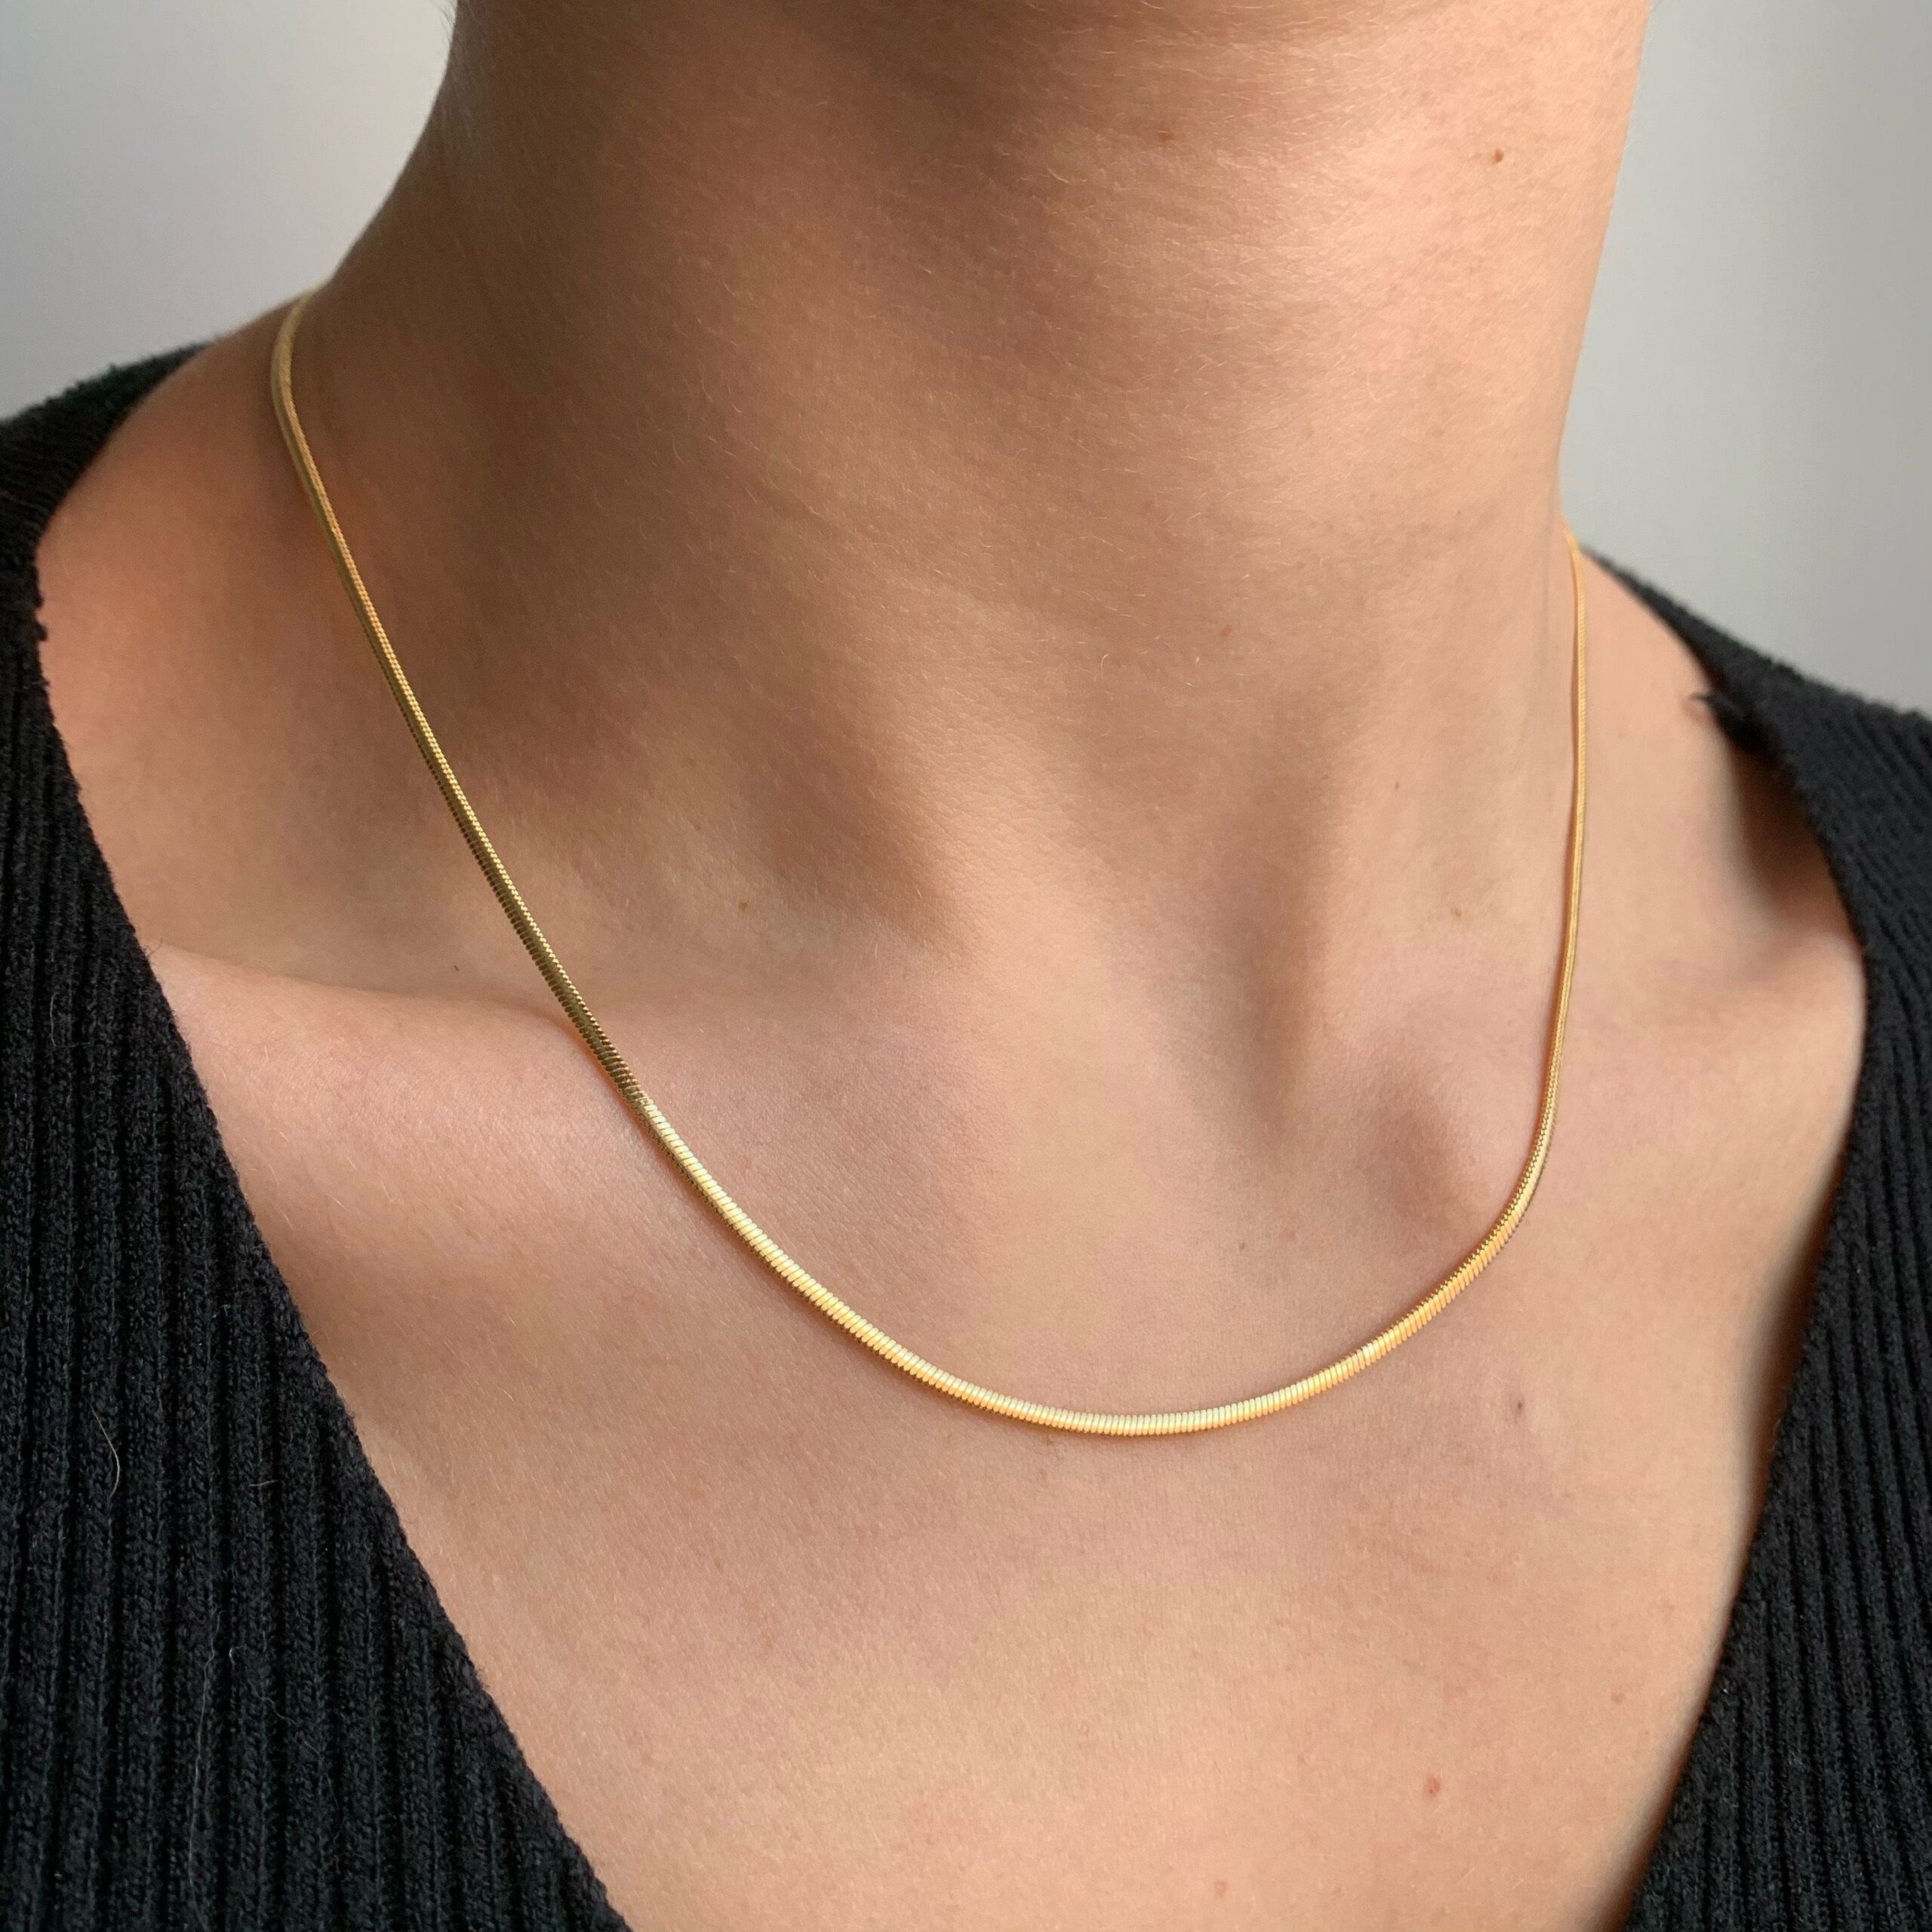 Shine Bright: Exploring the Beauty of Gold Chain Designs